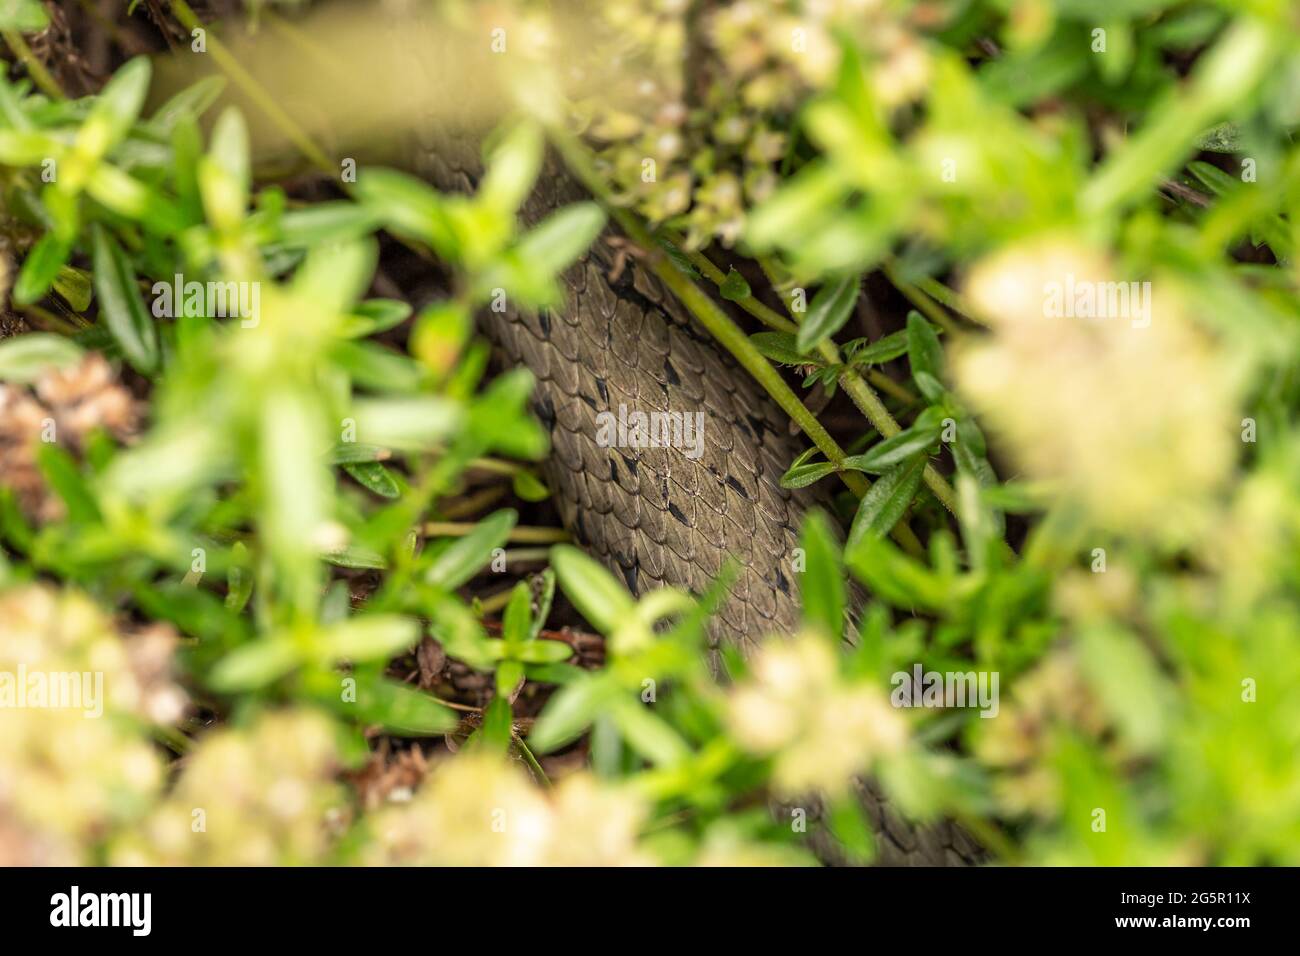 Close-up of a grass snake crawling in a garden Stock Photo